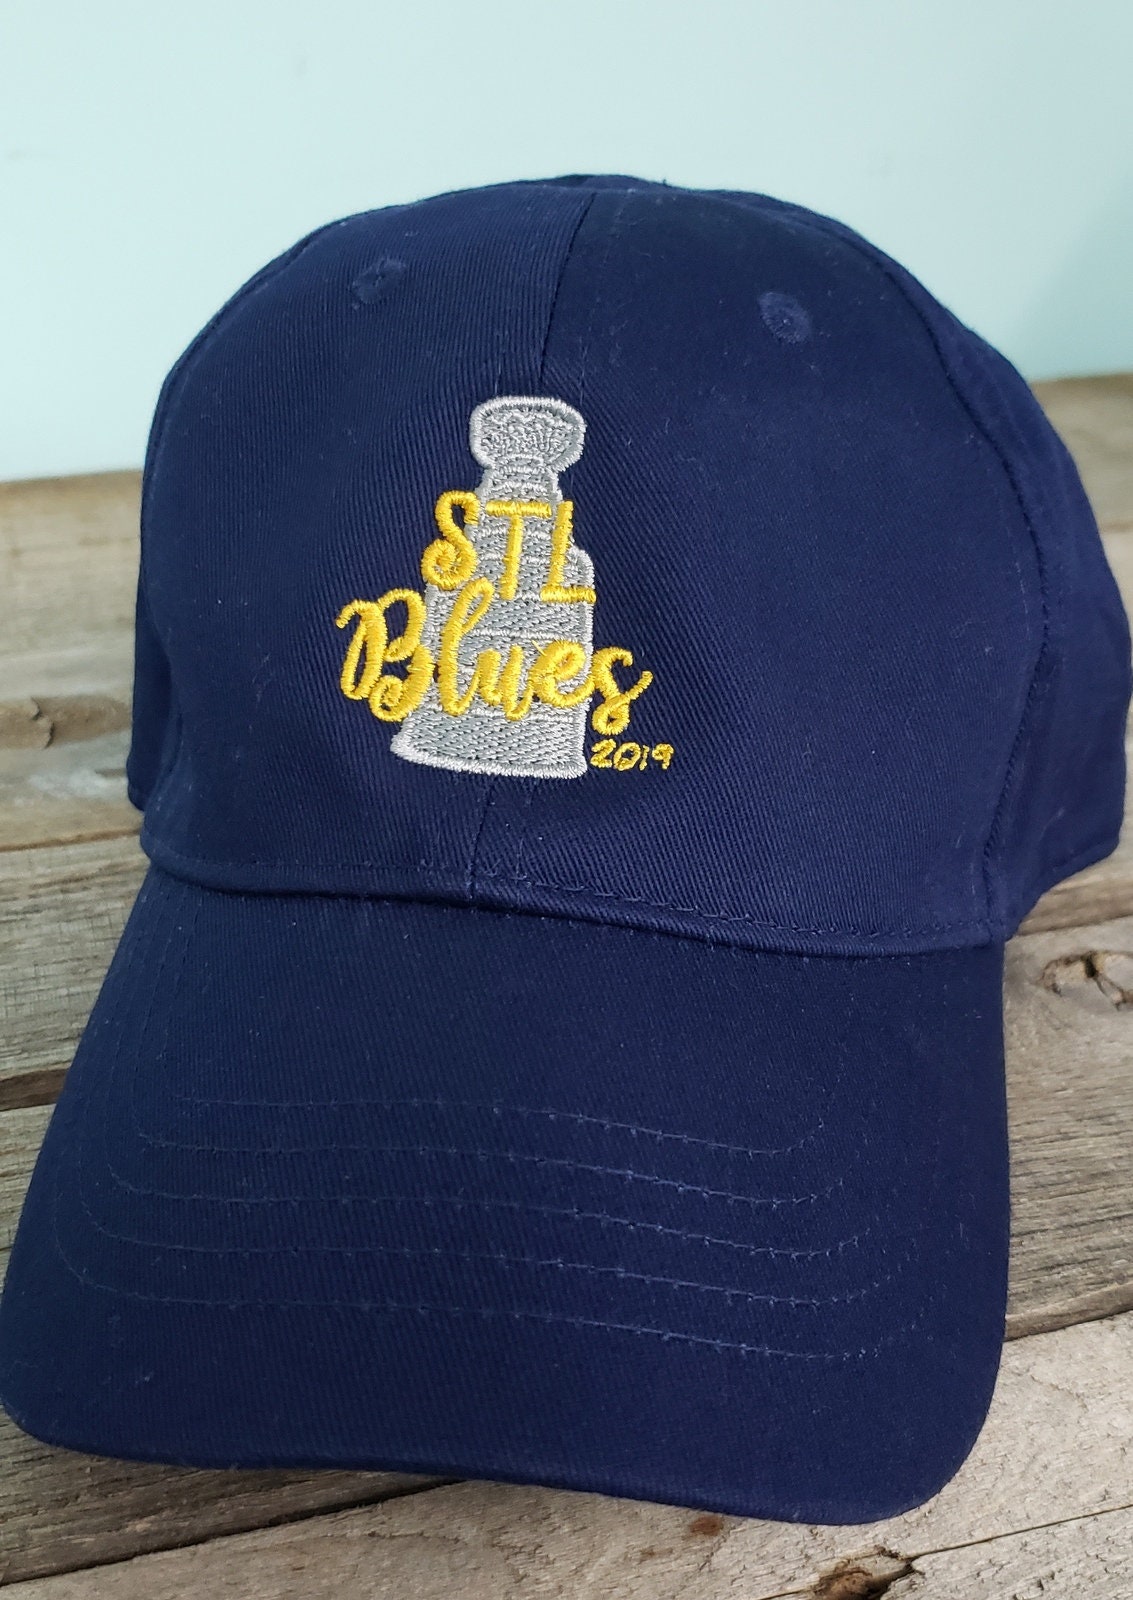 St. Louis Blues Hat/ Blues Hat/Embroidered Blues Hat/ Play Gloria/ Stanley  Cup/ Navy Trucker hat w/ Gold STL and white stanley